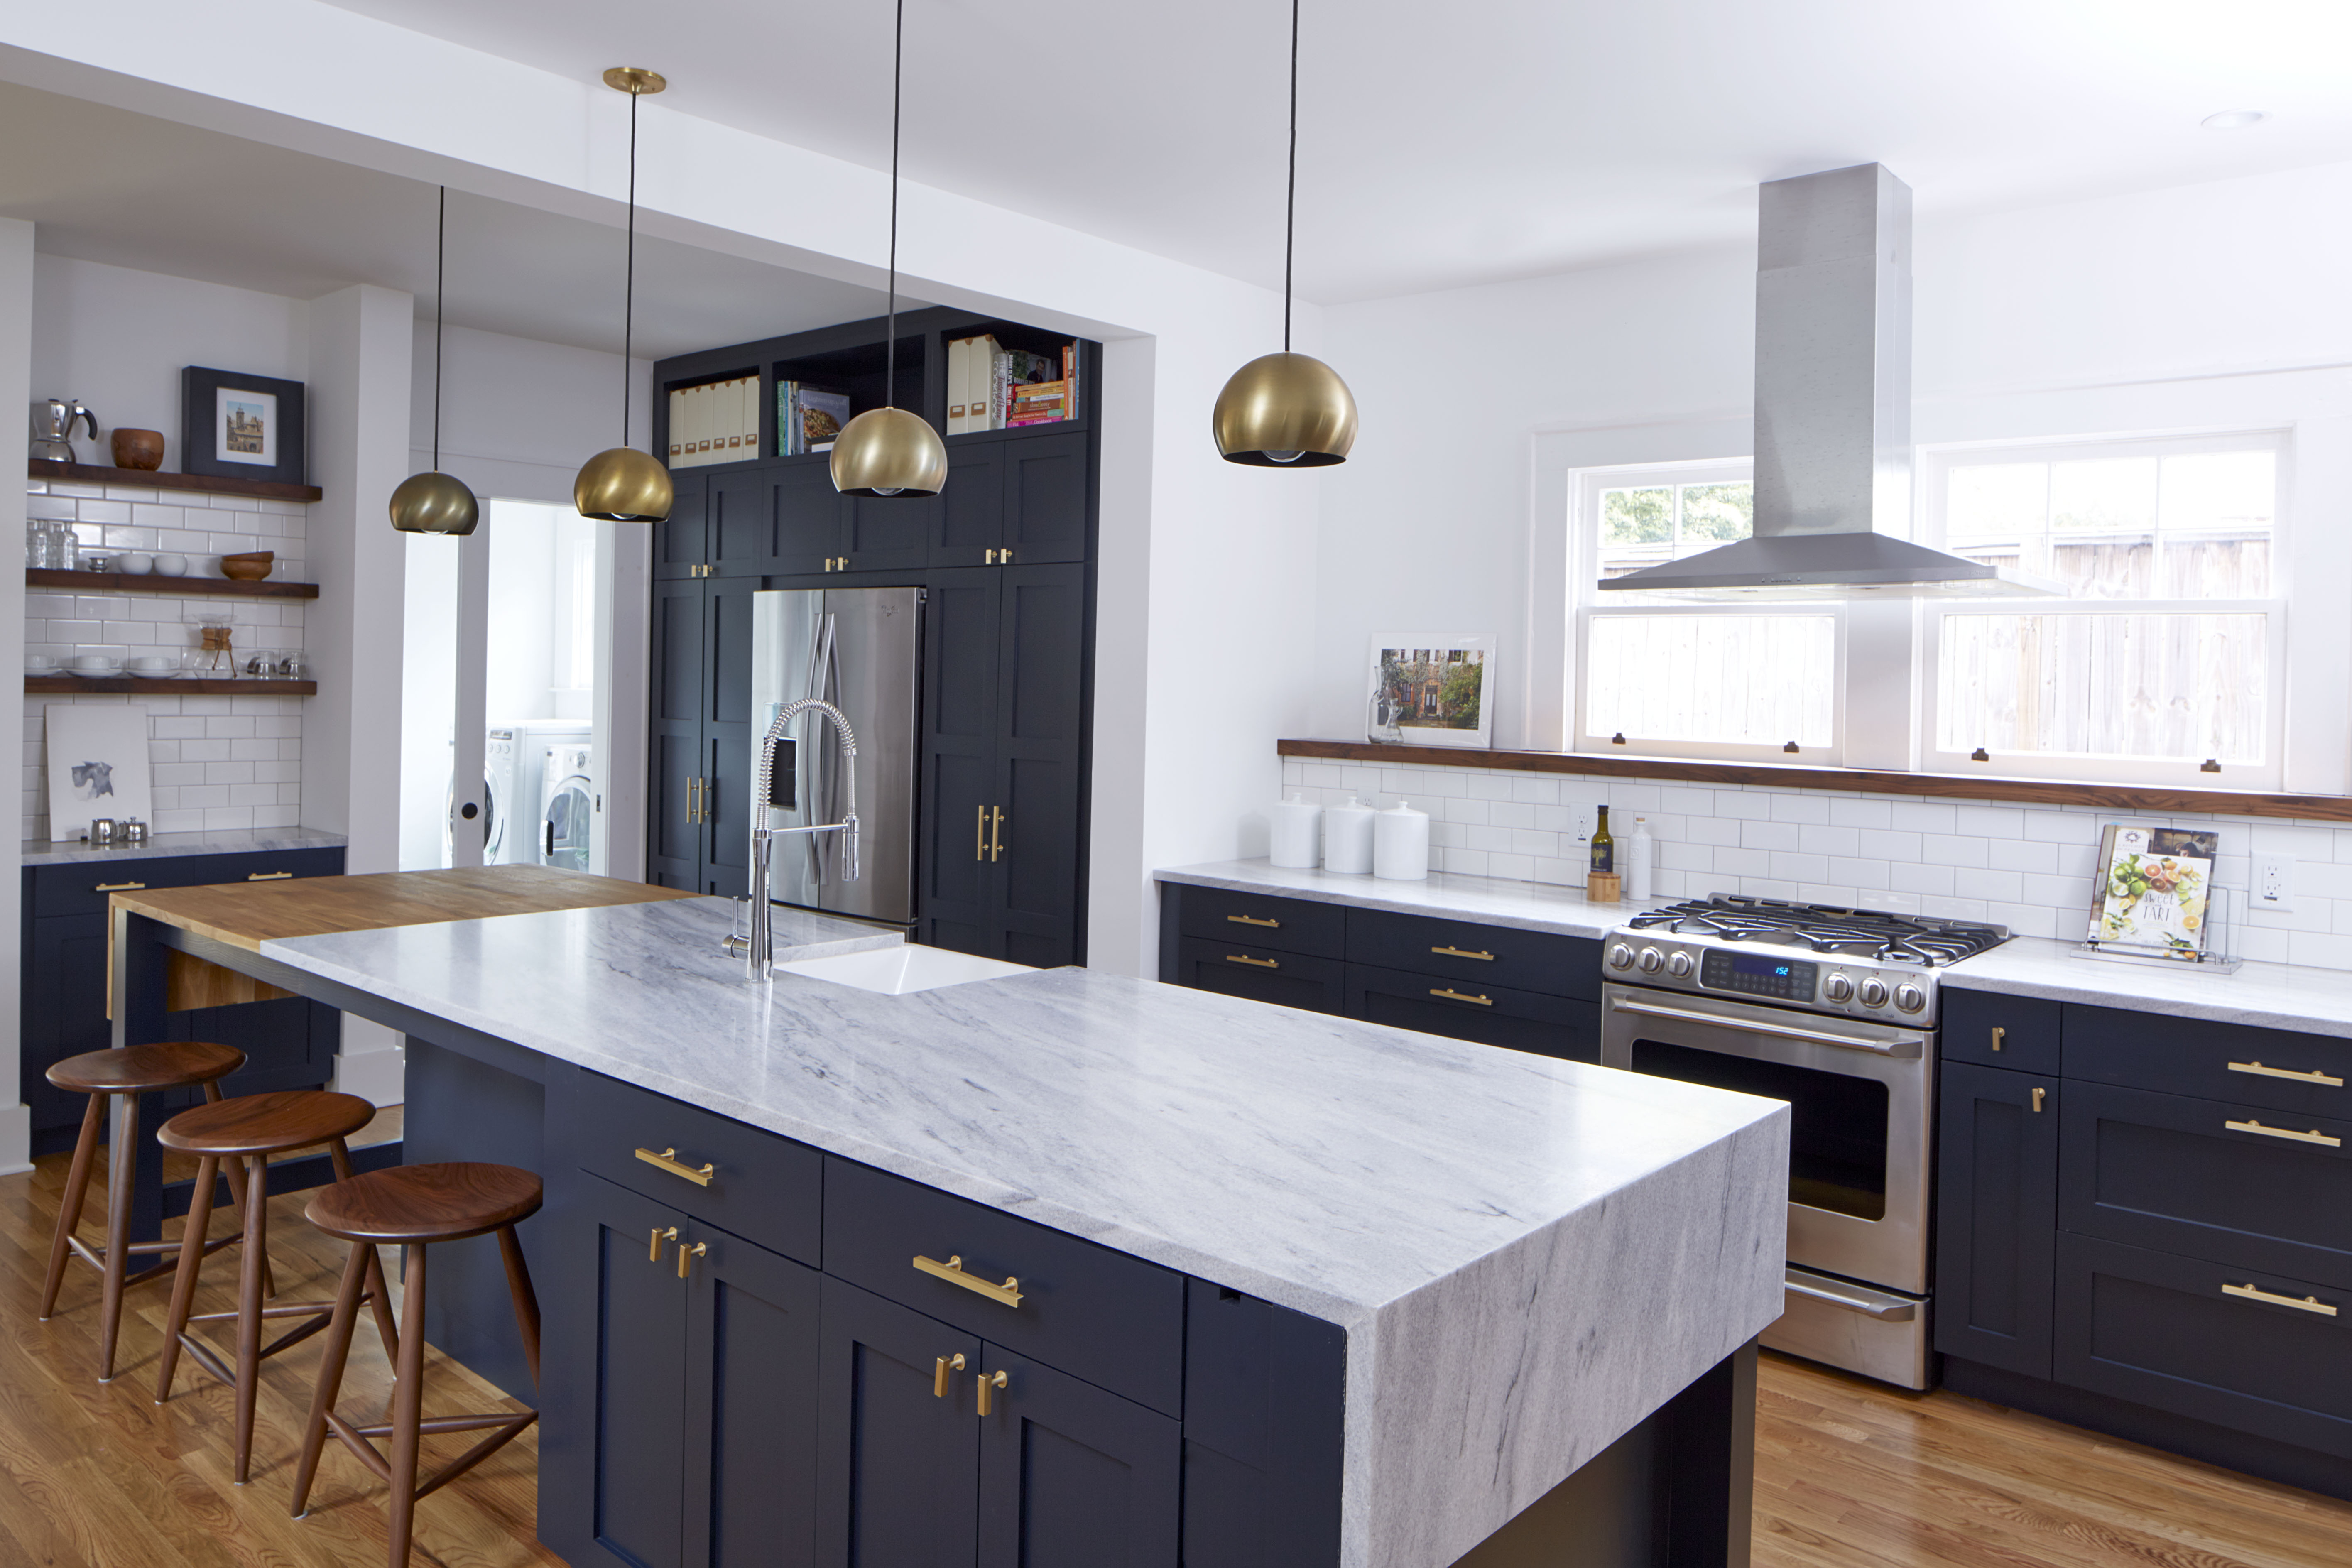 Georgia Architect Creates a Stunner Family Kitchen With Local Marble